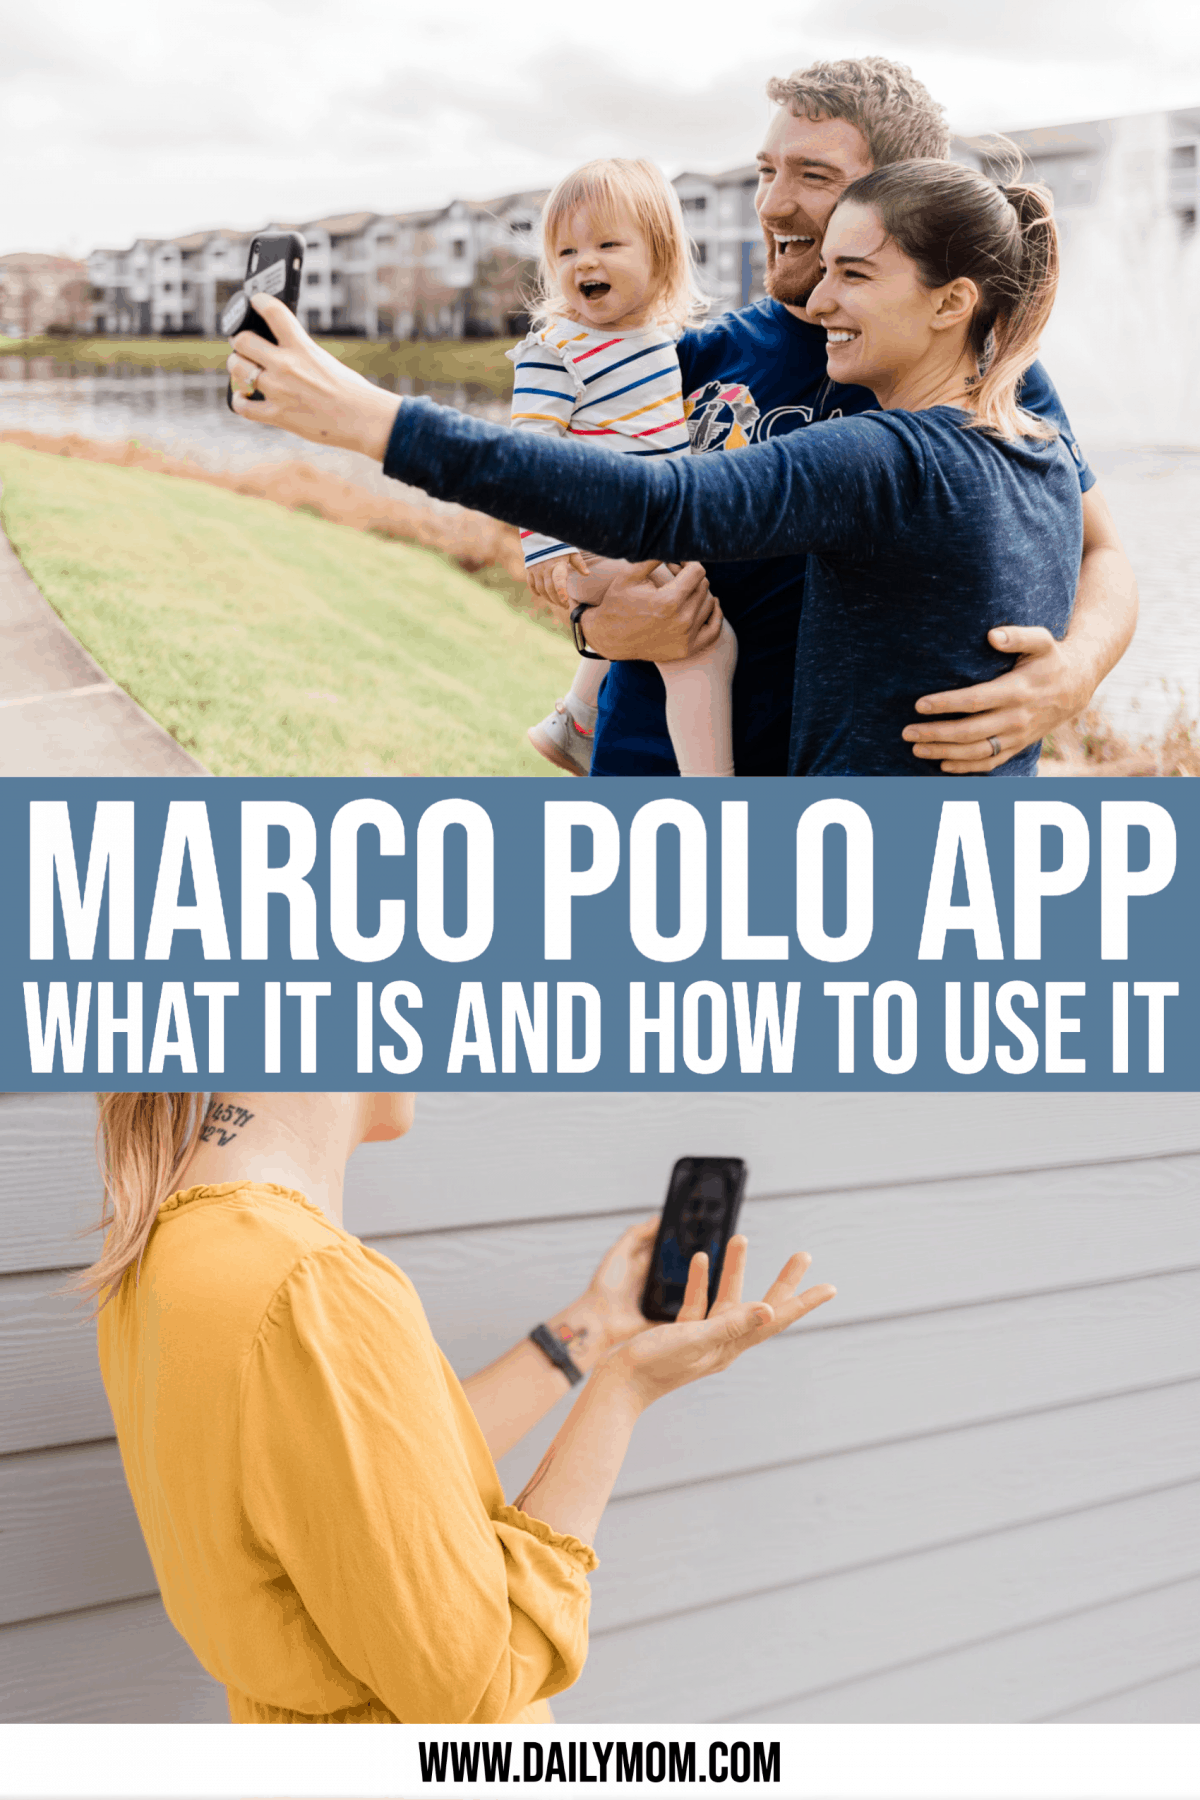 Marco Polo: What It Is And How To Use The App